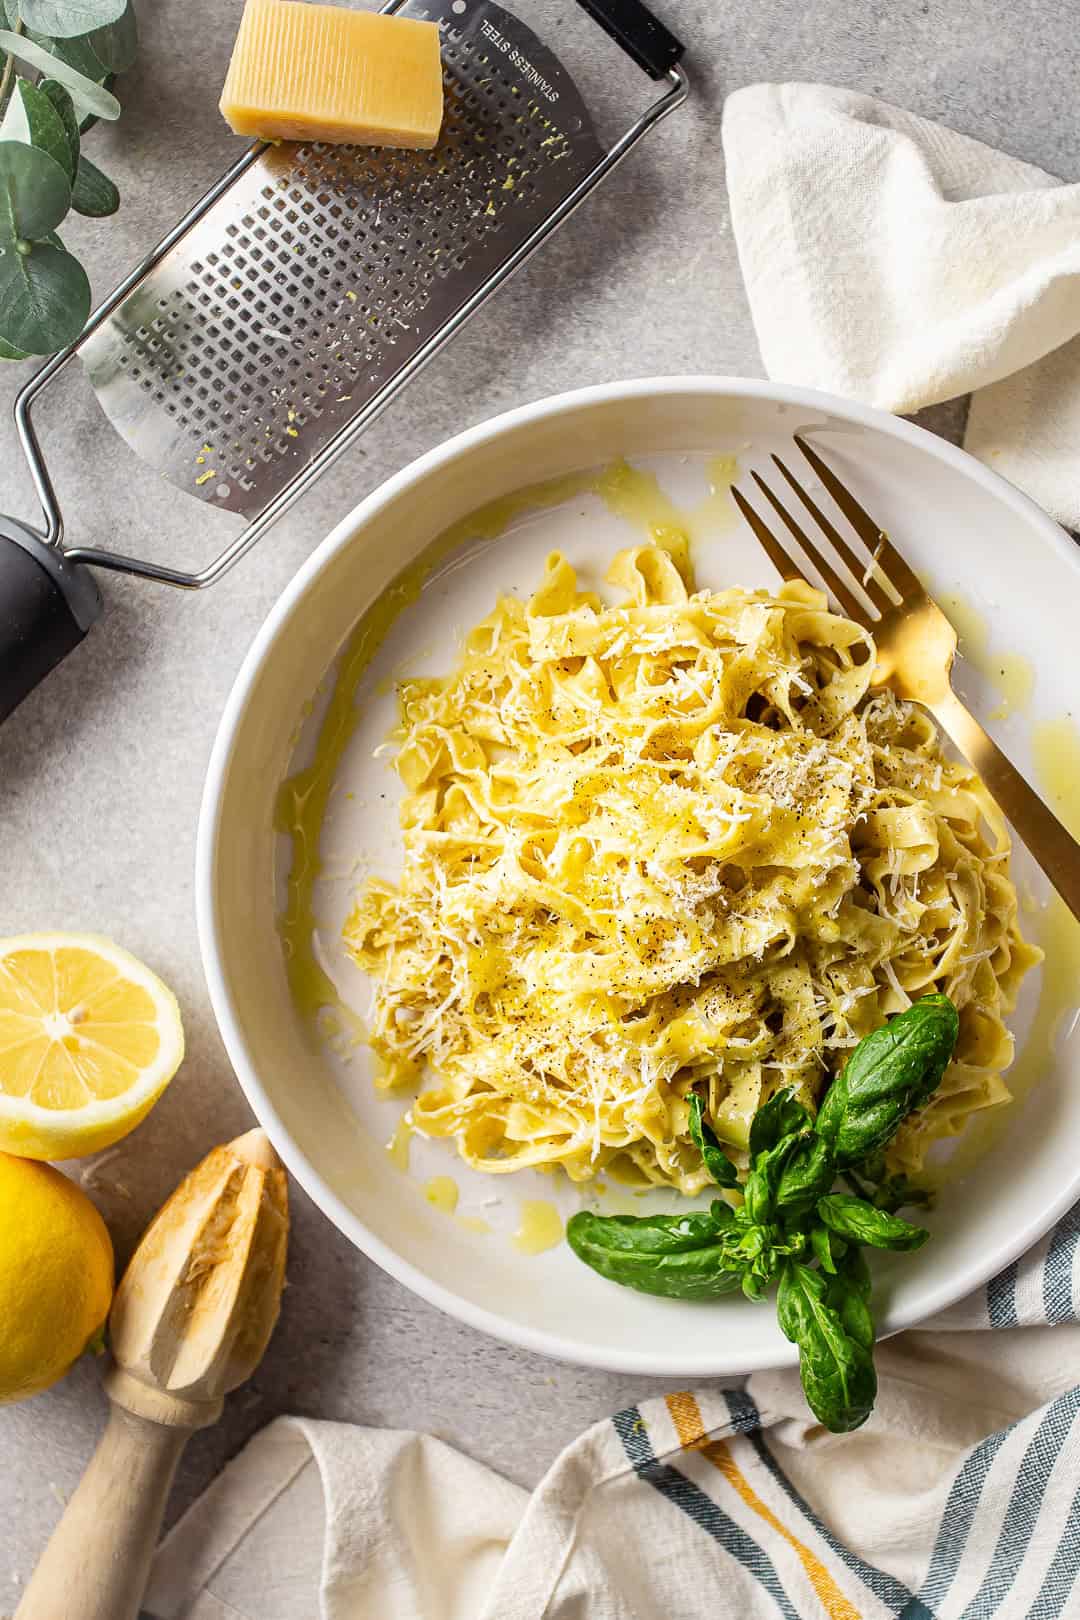 Creamy lemon pasta presented on a gray tabletop with lemons and parmesan cheese.